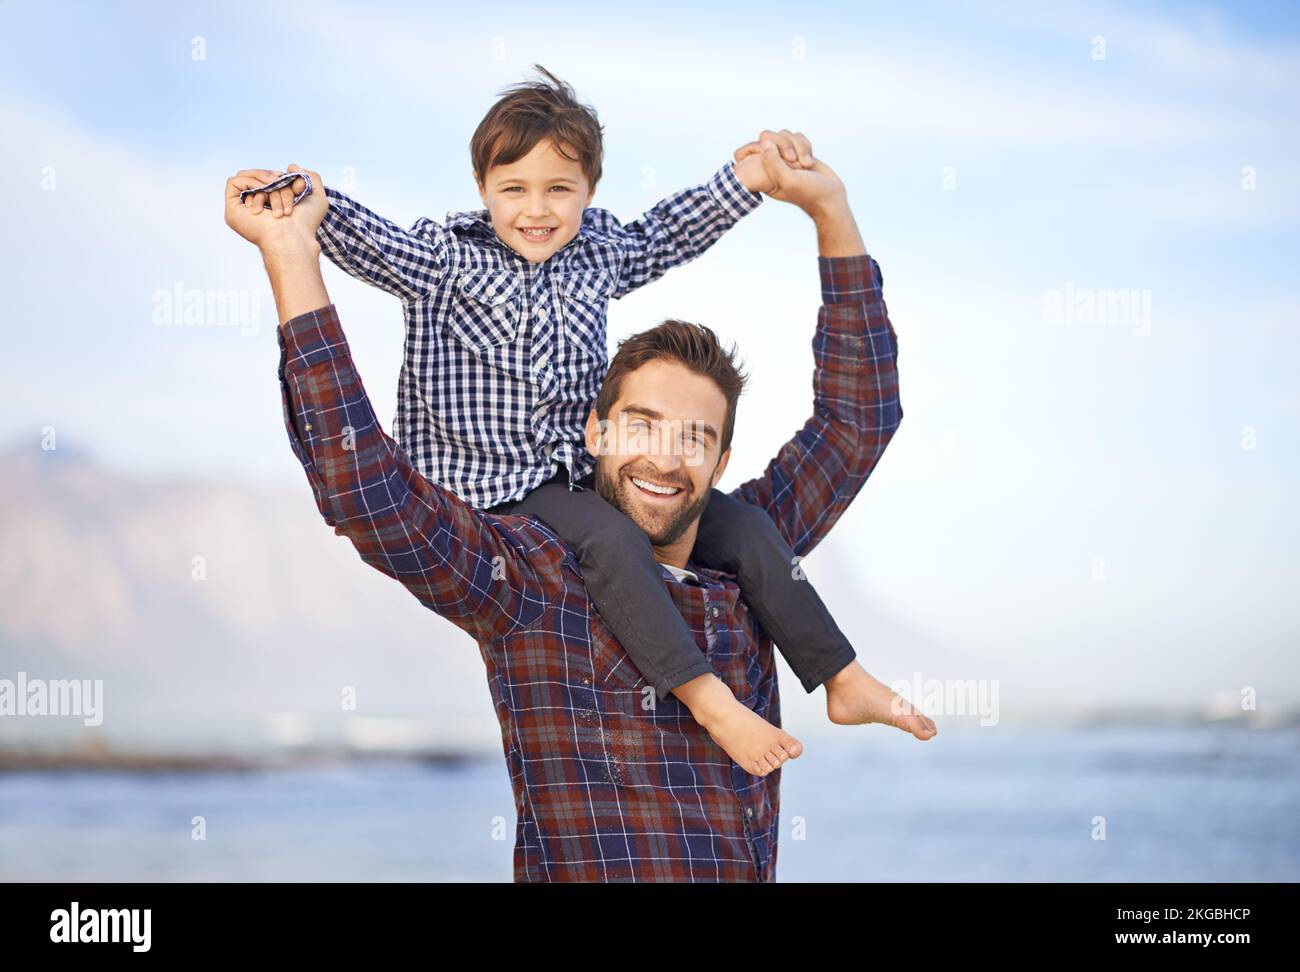 Raising his son the right way. Shjot of a father and son enjoying a day outdoors. Stock Photo